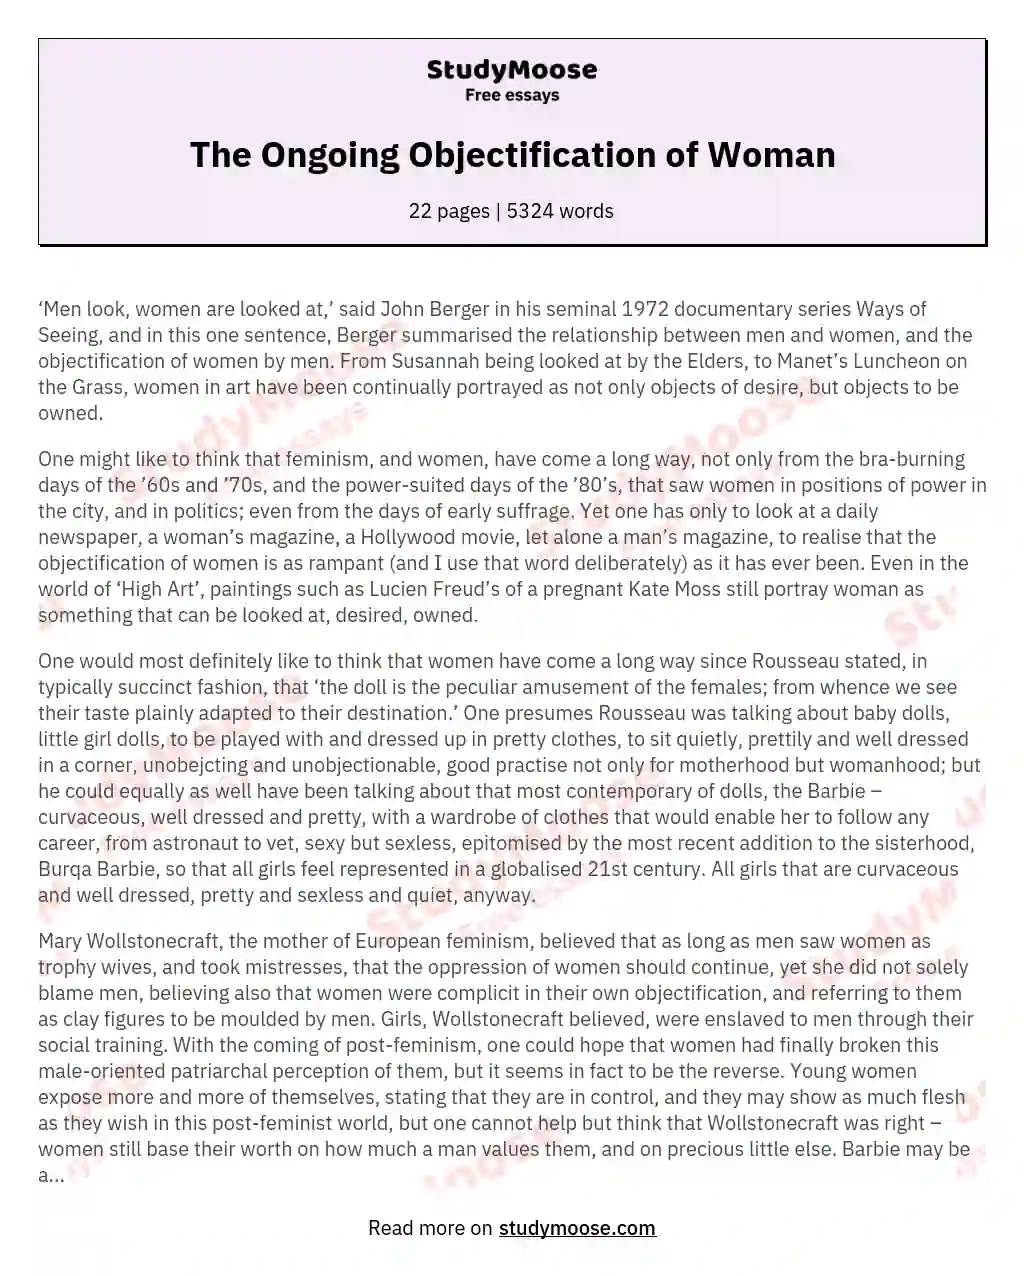 The Ongoing Objectification of Woman essay